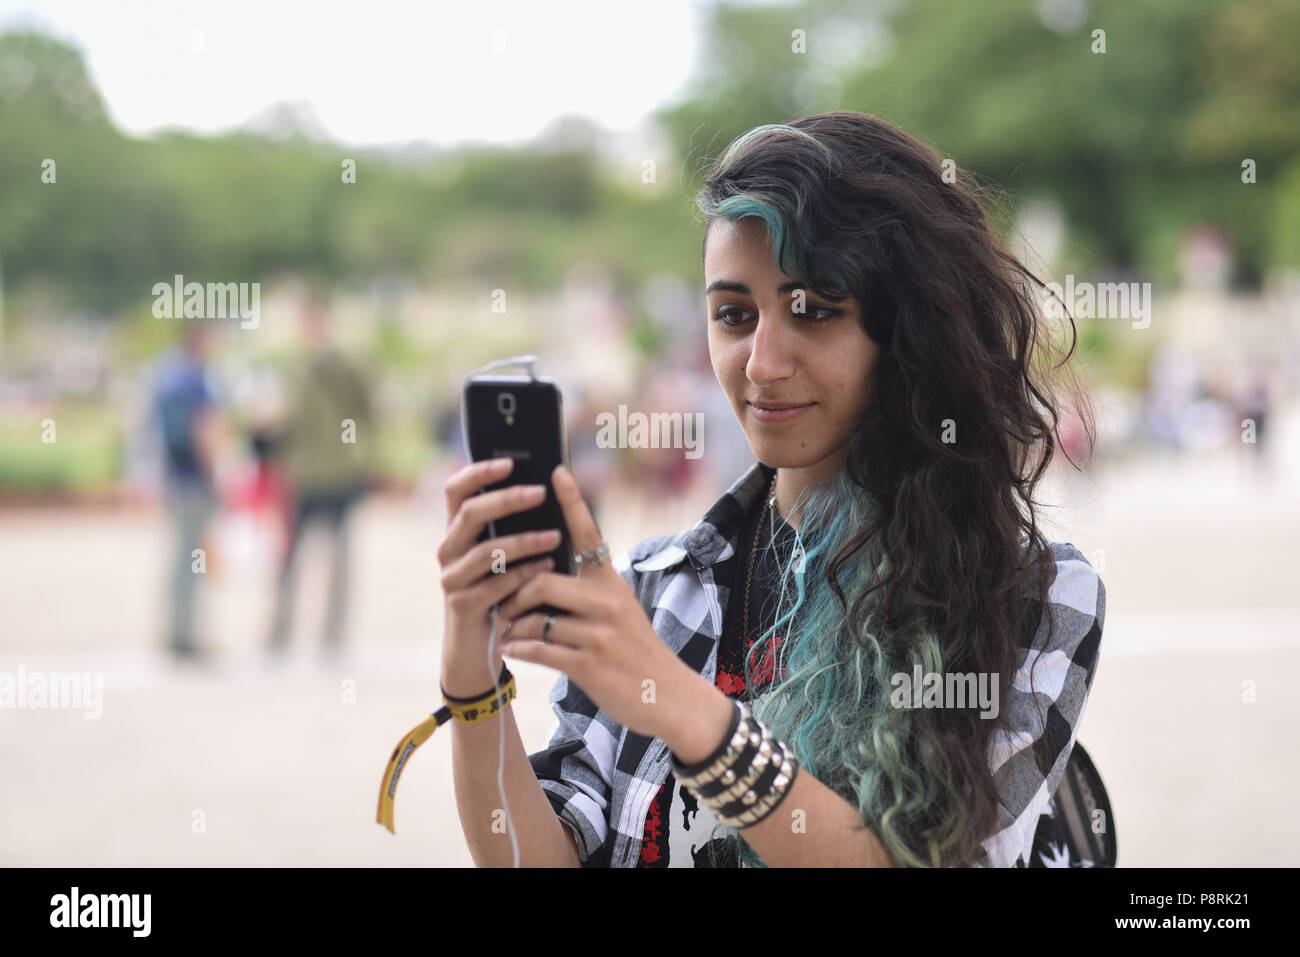 July 14, 2016 - Paris, France: French arts students Calypso, 17 yo, takes part in a mass Pokemon hunt in the Luxembourg Garden in central Paris. Hundreds of players of the new Pokemon Go game showed up to take part in a massive hunt despite the authorities' attempt to cancel the event. Despite playing mostly solo, the Pokemon Go users enjoyed to interact and meet other players. Millions of users have already downloaded the game, which requires users to catch on-screen pokemon characters using their real-world location.  Des jeunes participent a une chasse au Pokemons dans le jardin du Luxembou Stock Photo